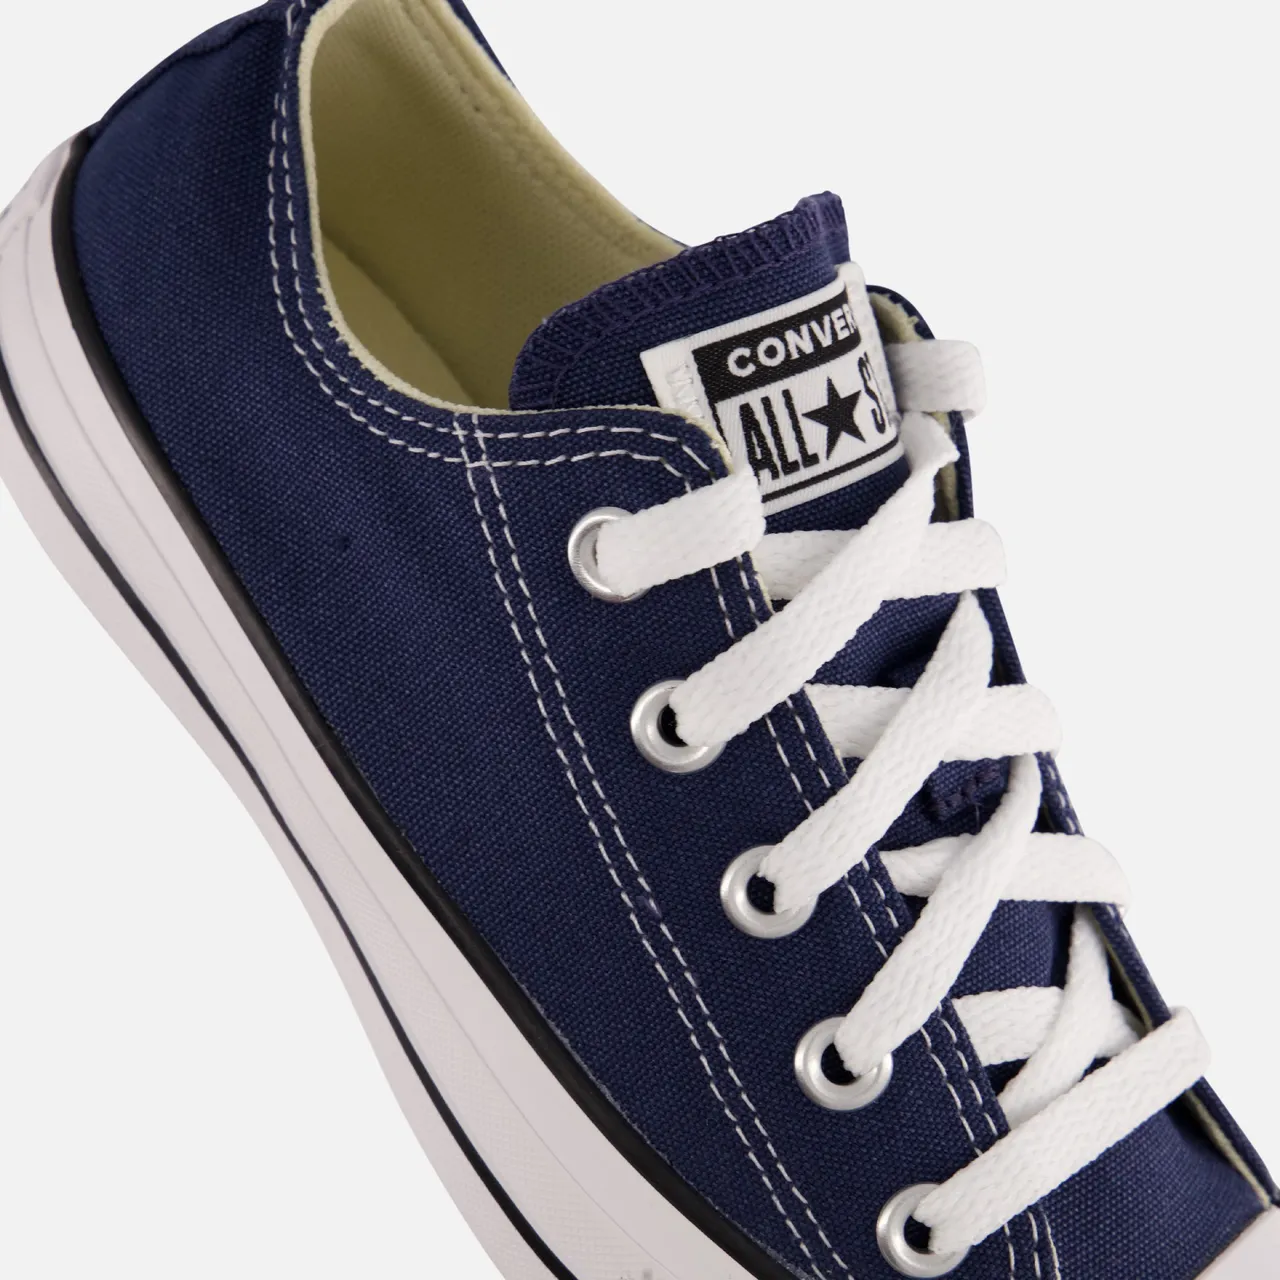 Converse Chuck Taylor Ox Sneakers blauw Canvas